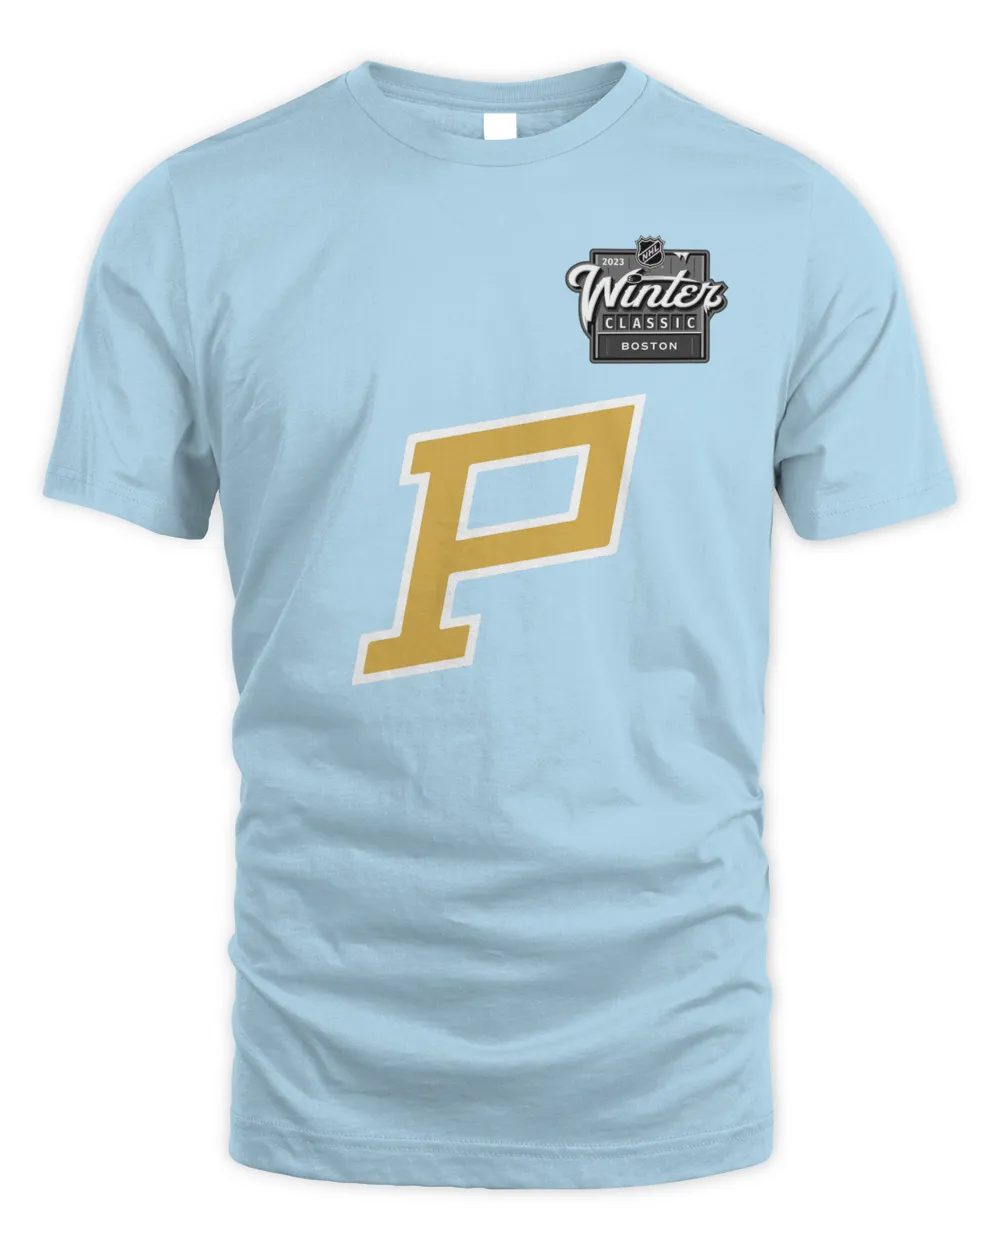 Pittsburgh Penguins 2023 NHL Winter Classic Primary Logo shirt